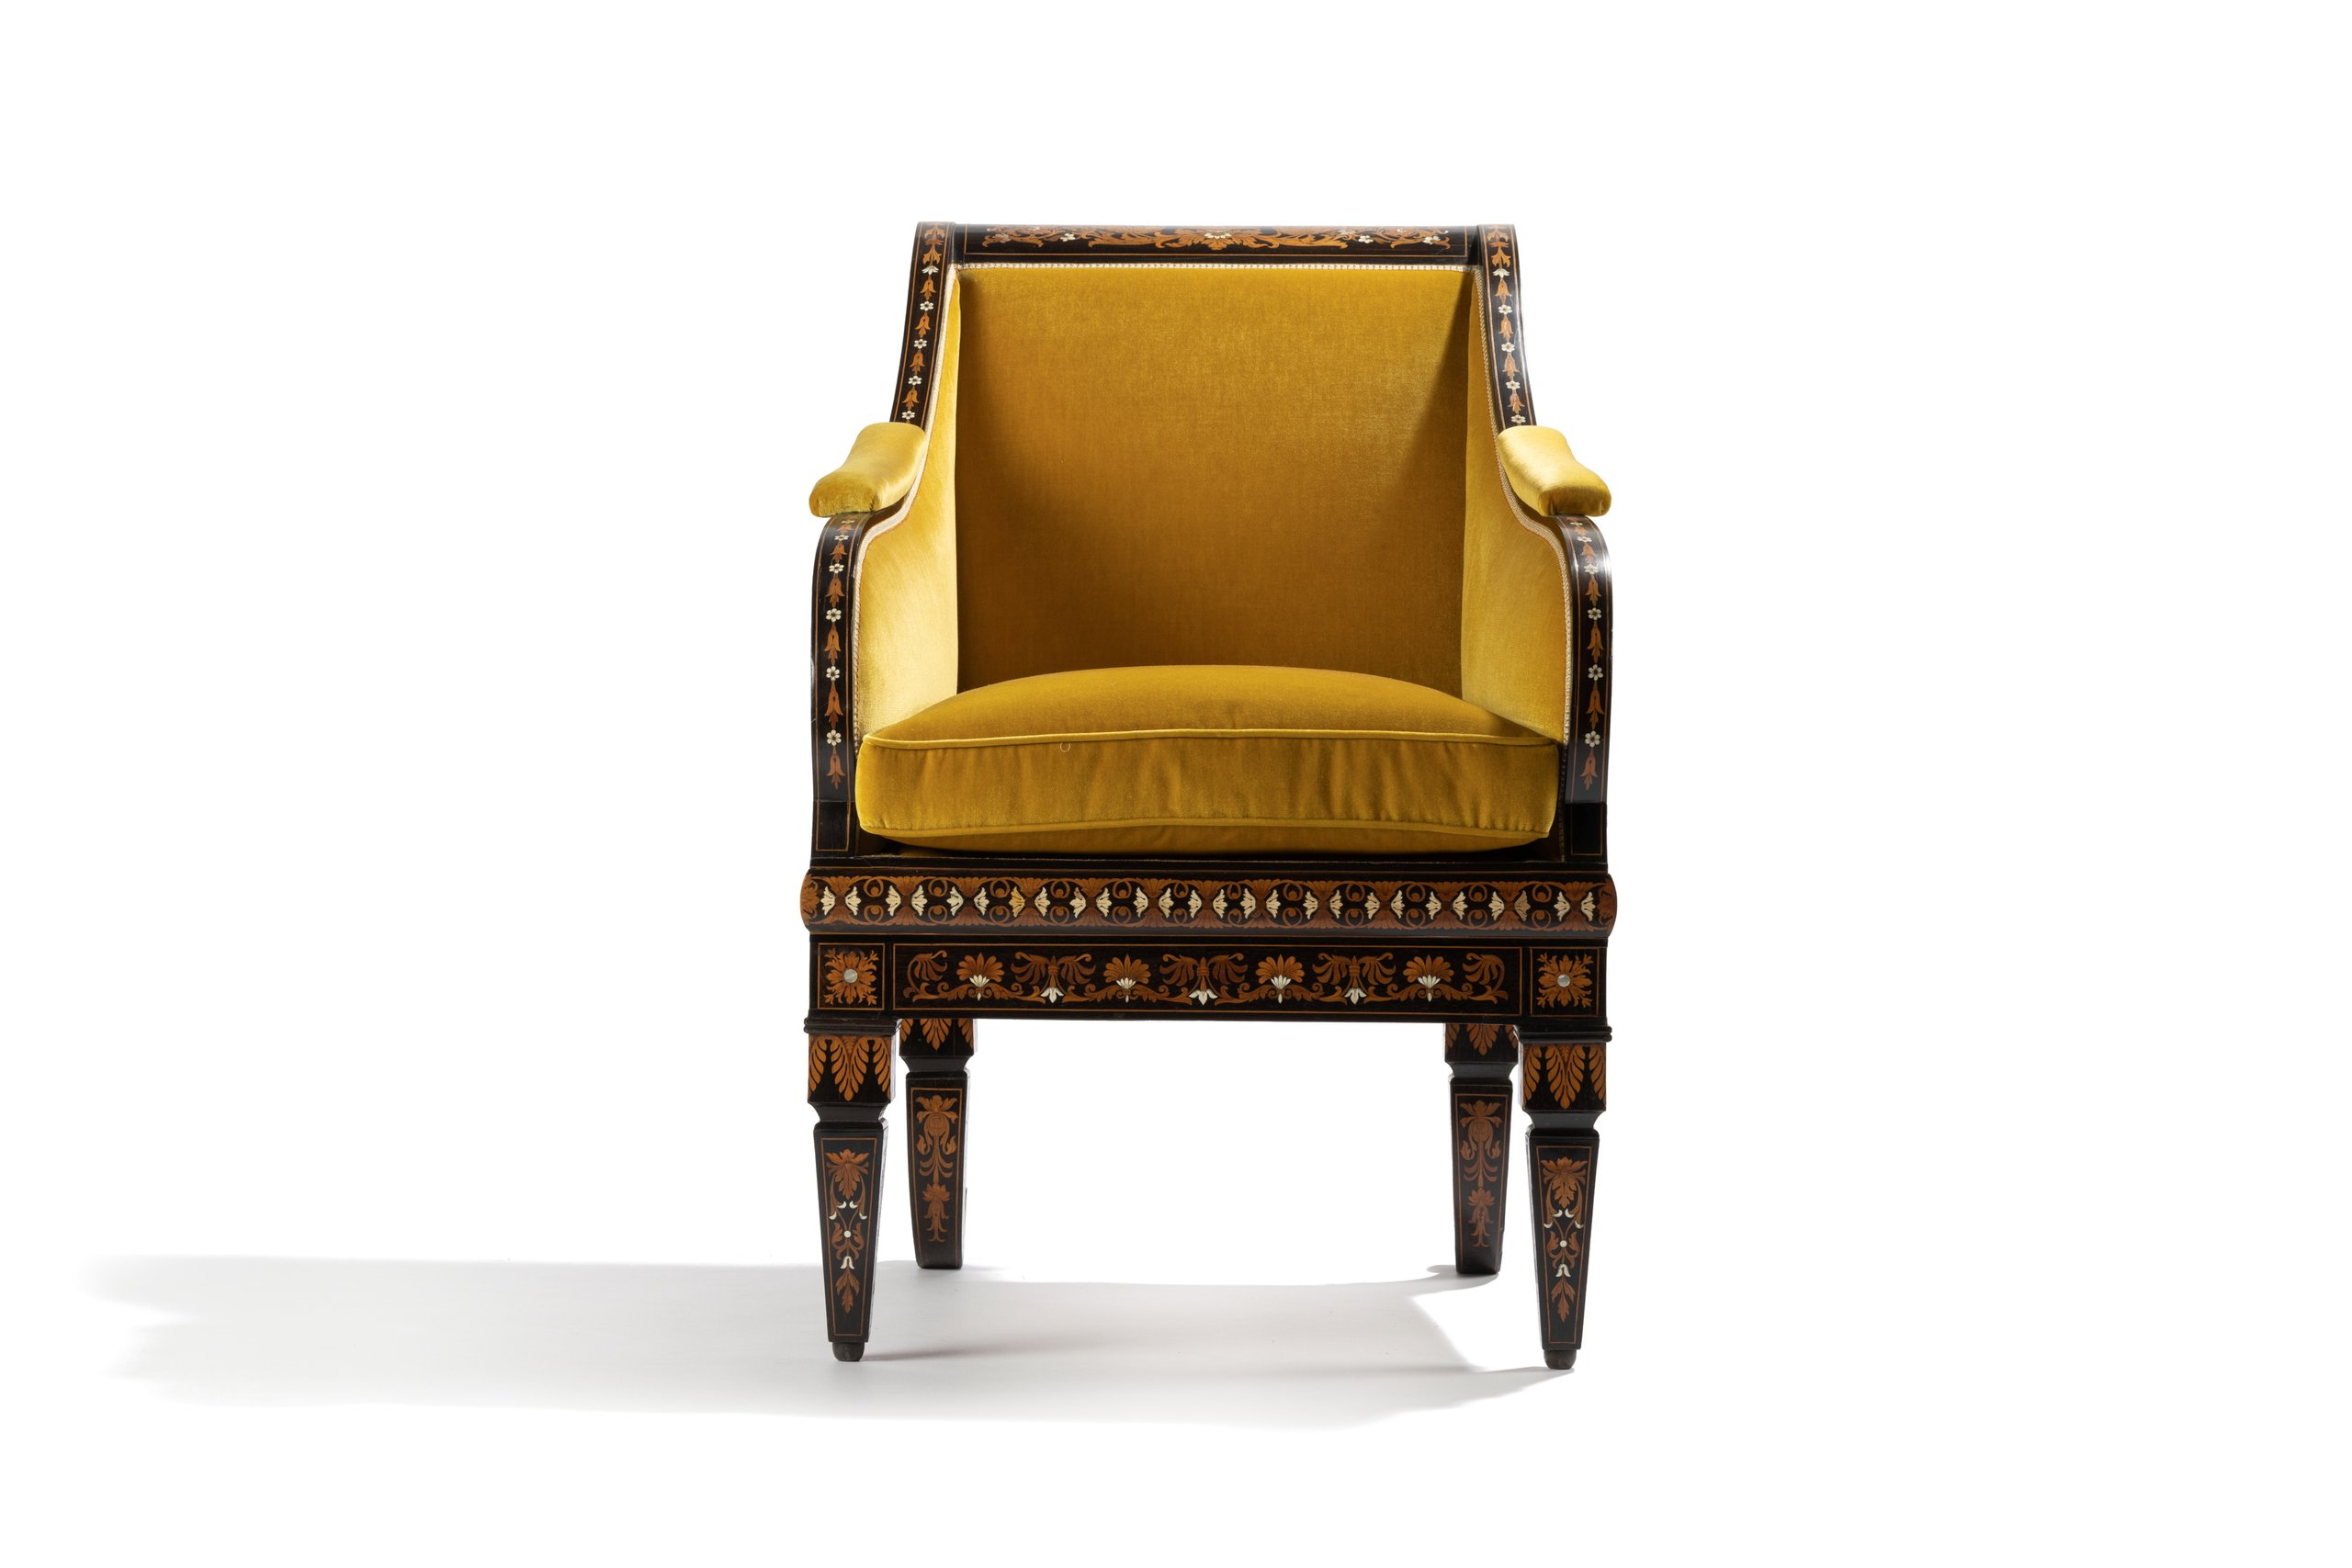 Classical revival armchair made for James Lenox